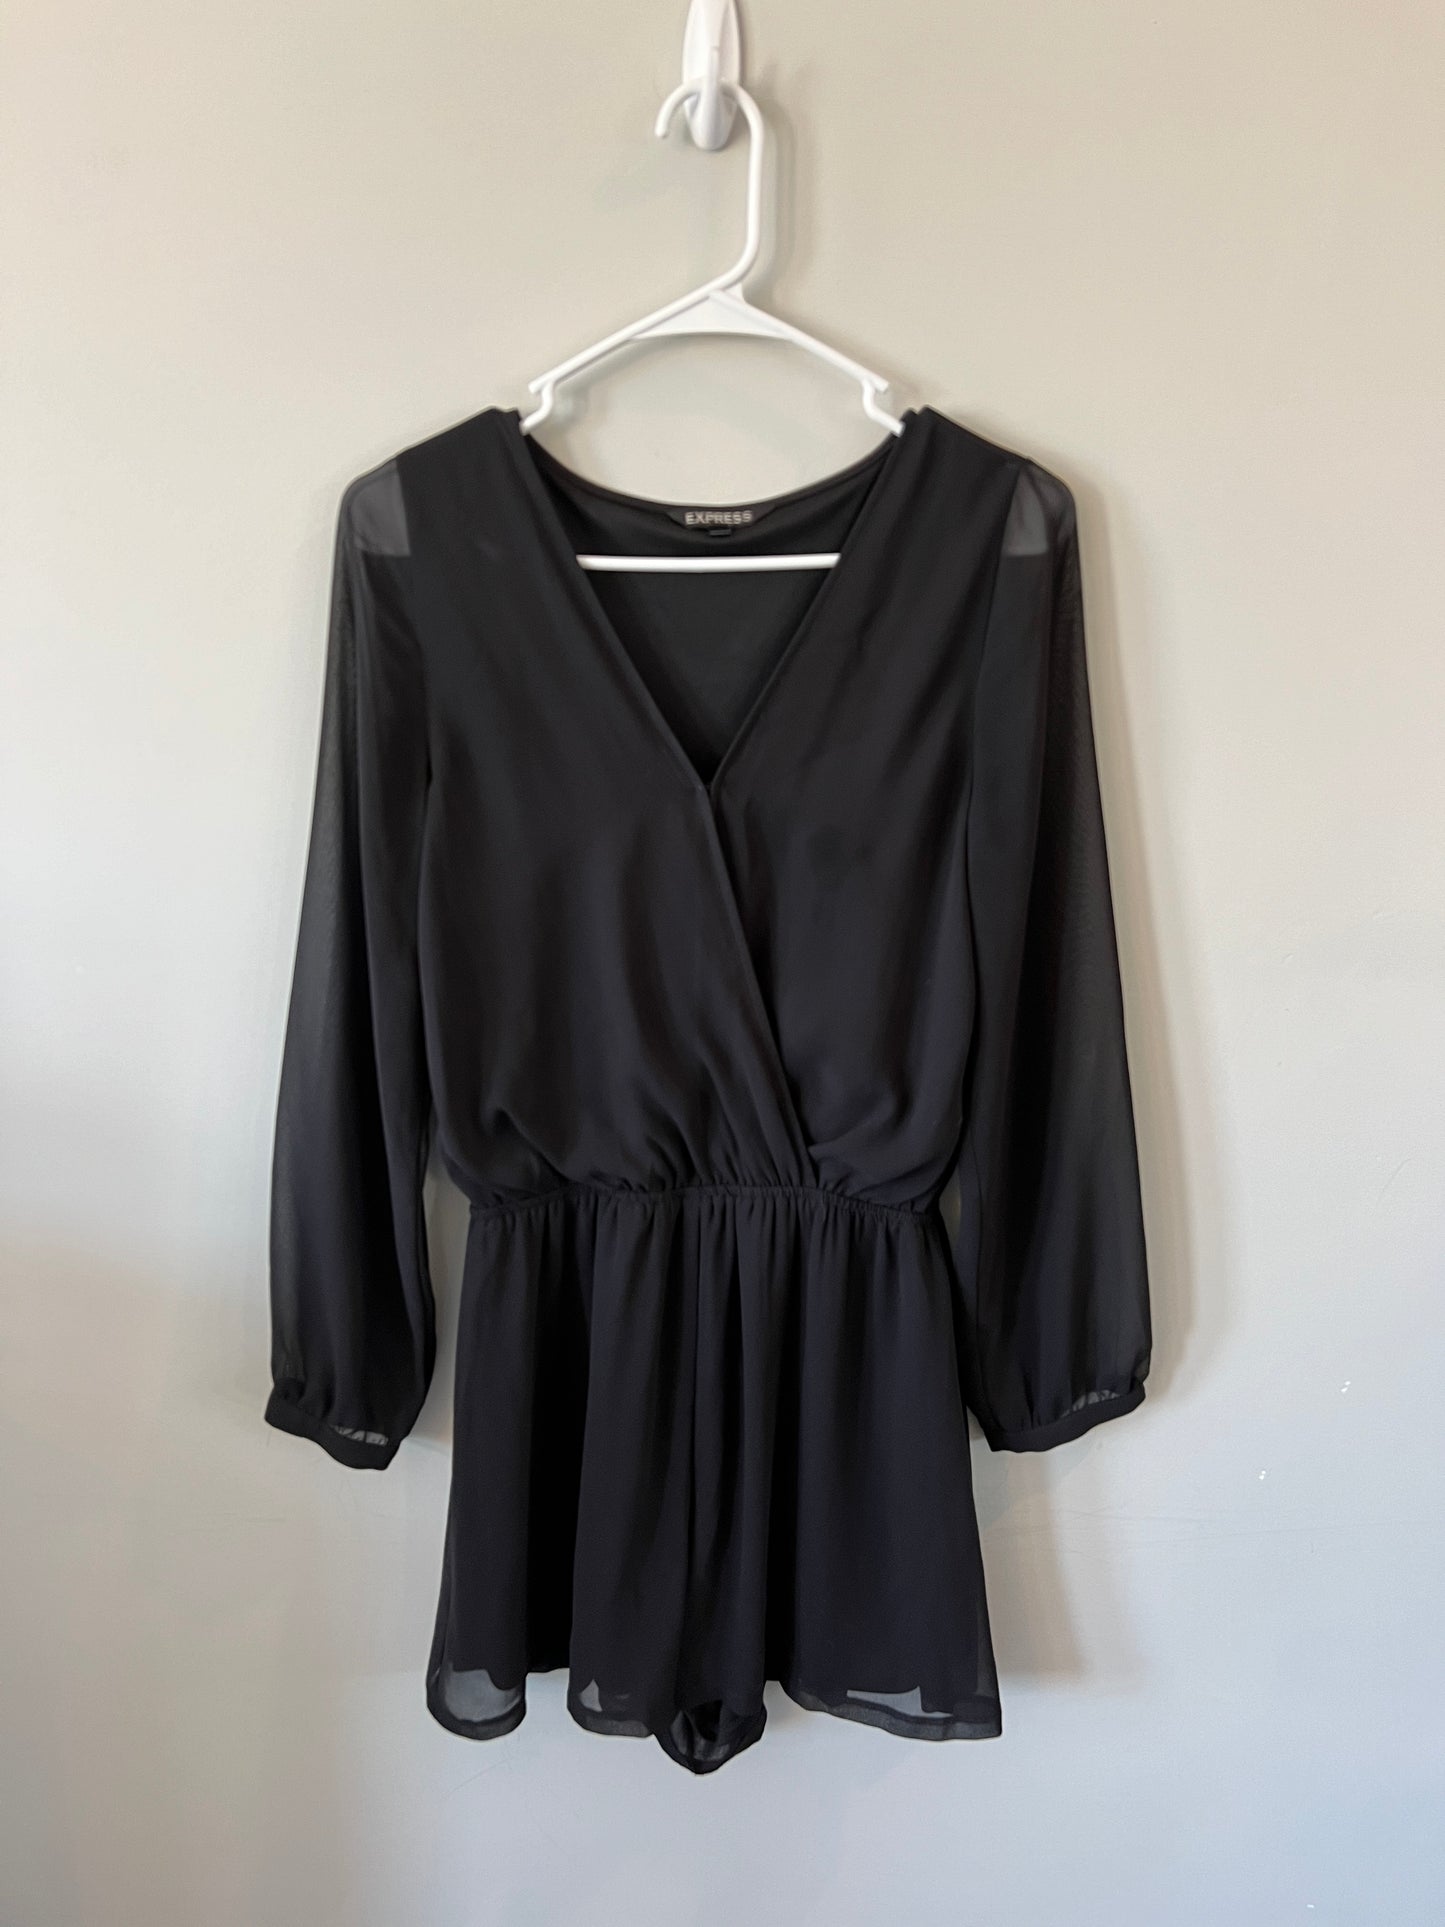 Women’s S Black Express Romper with Sheer Detailing- PPU 45044 (Liberty Twp)